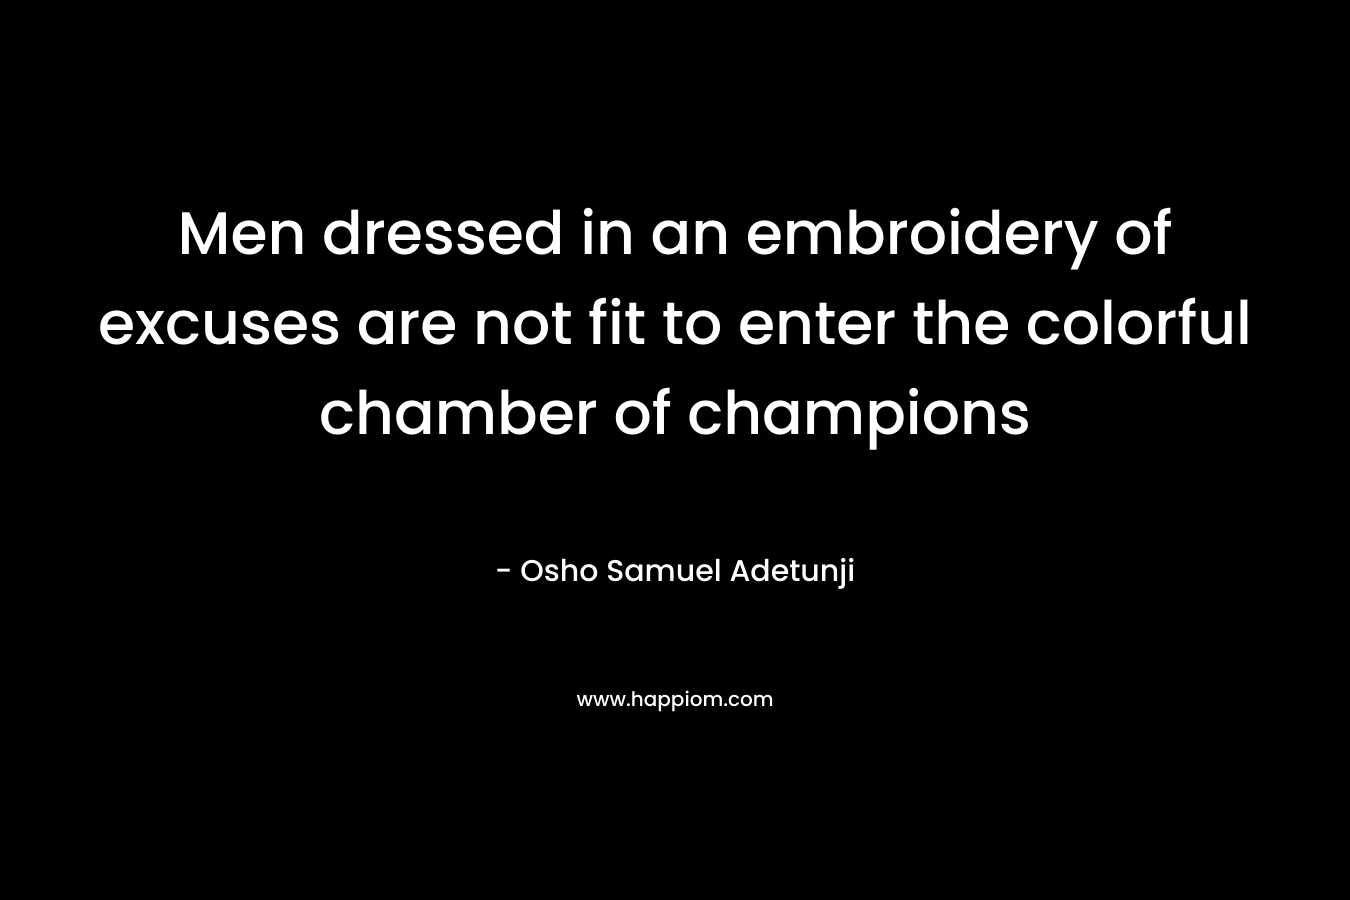 Men dressed in an embroidery of excuses are not fit to enter the colorful chamber of champions – Osho Samuel Adetunji